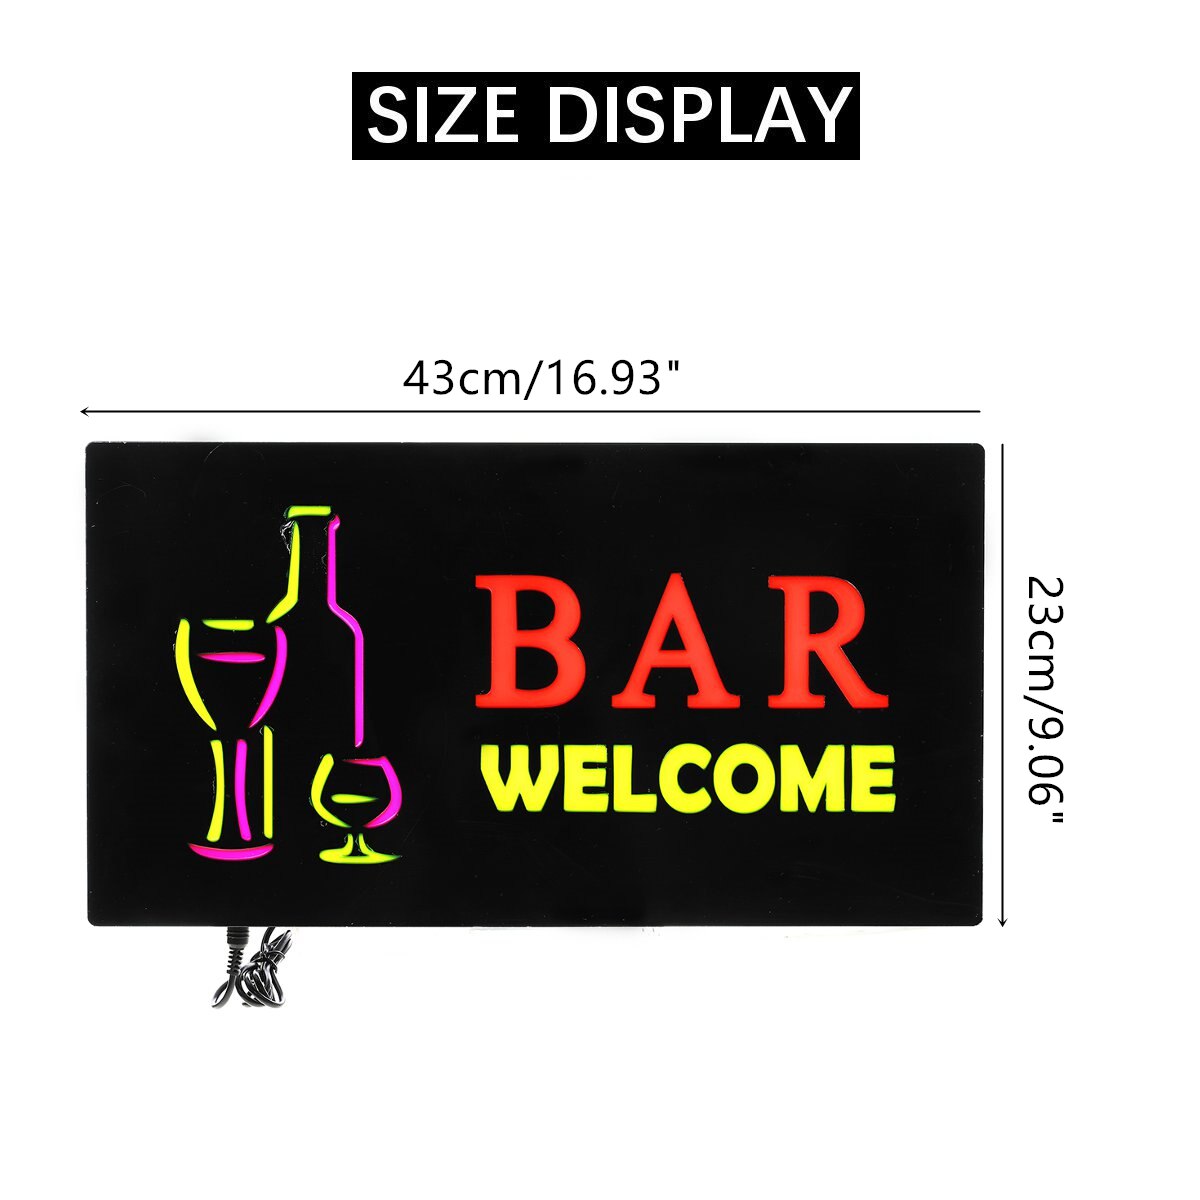 BAR Welcome LED Hanging Sign Light Board Pub Store Door Window Display Lamp Party Decoration Advertising Commercial Lighting